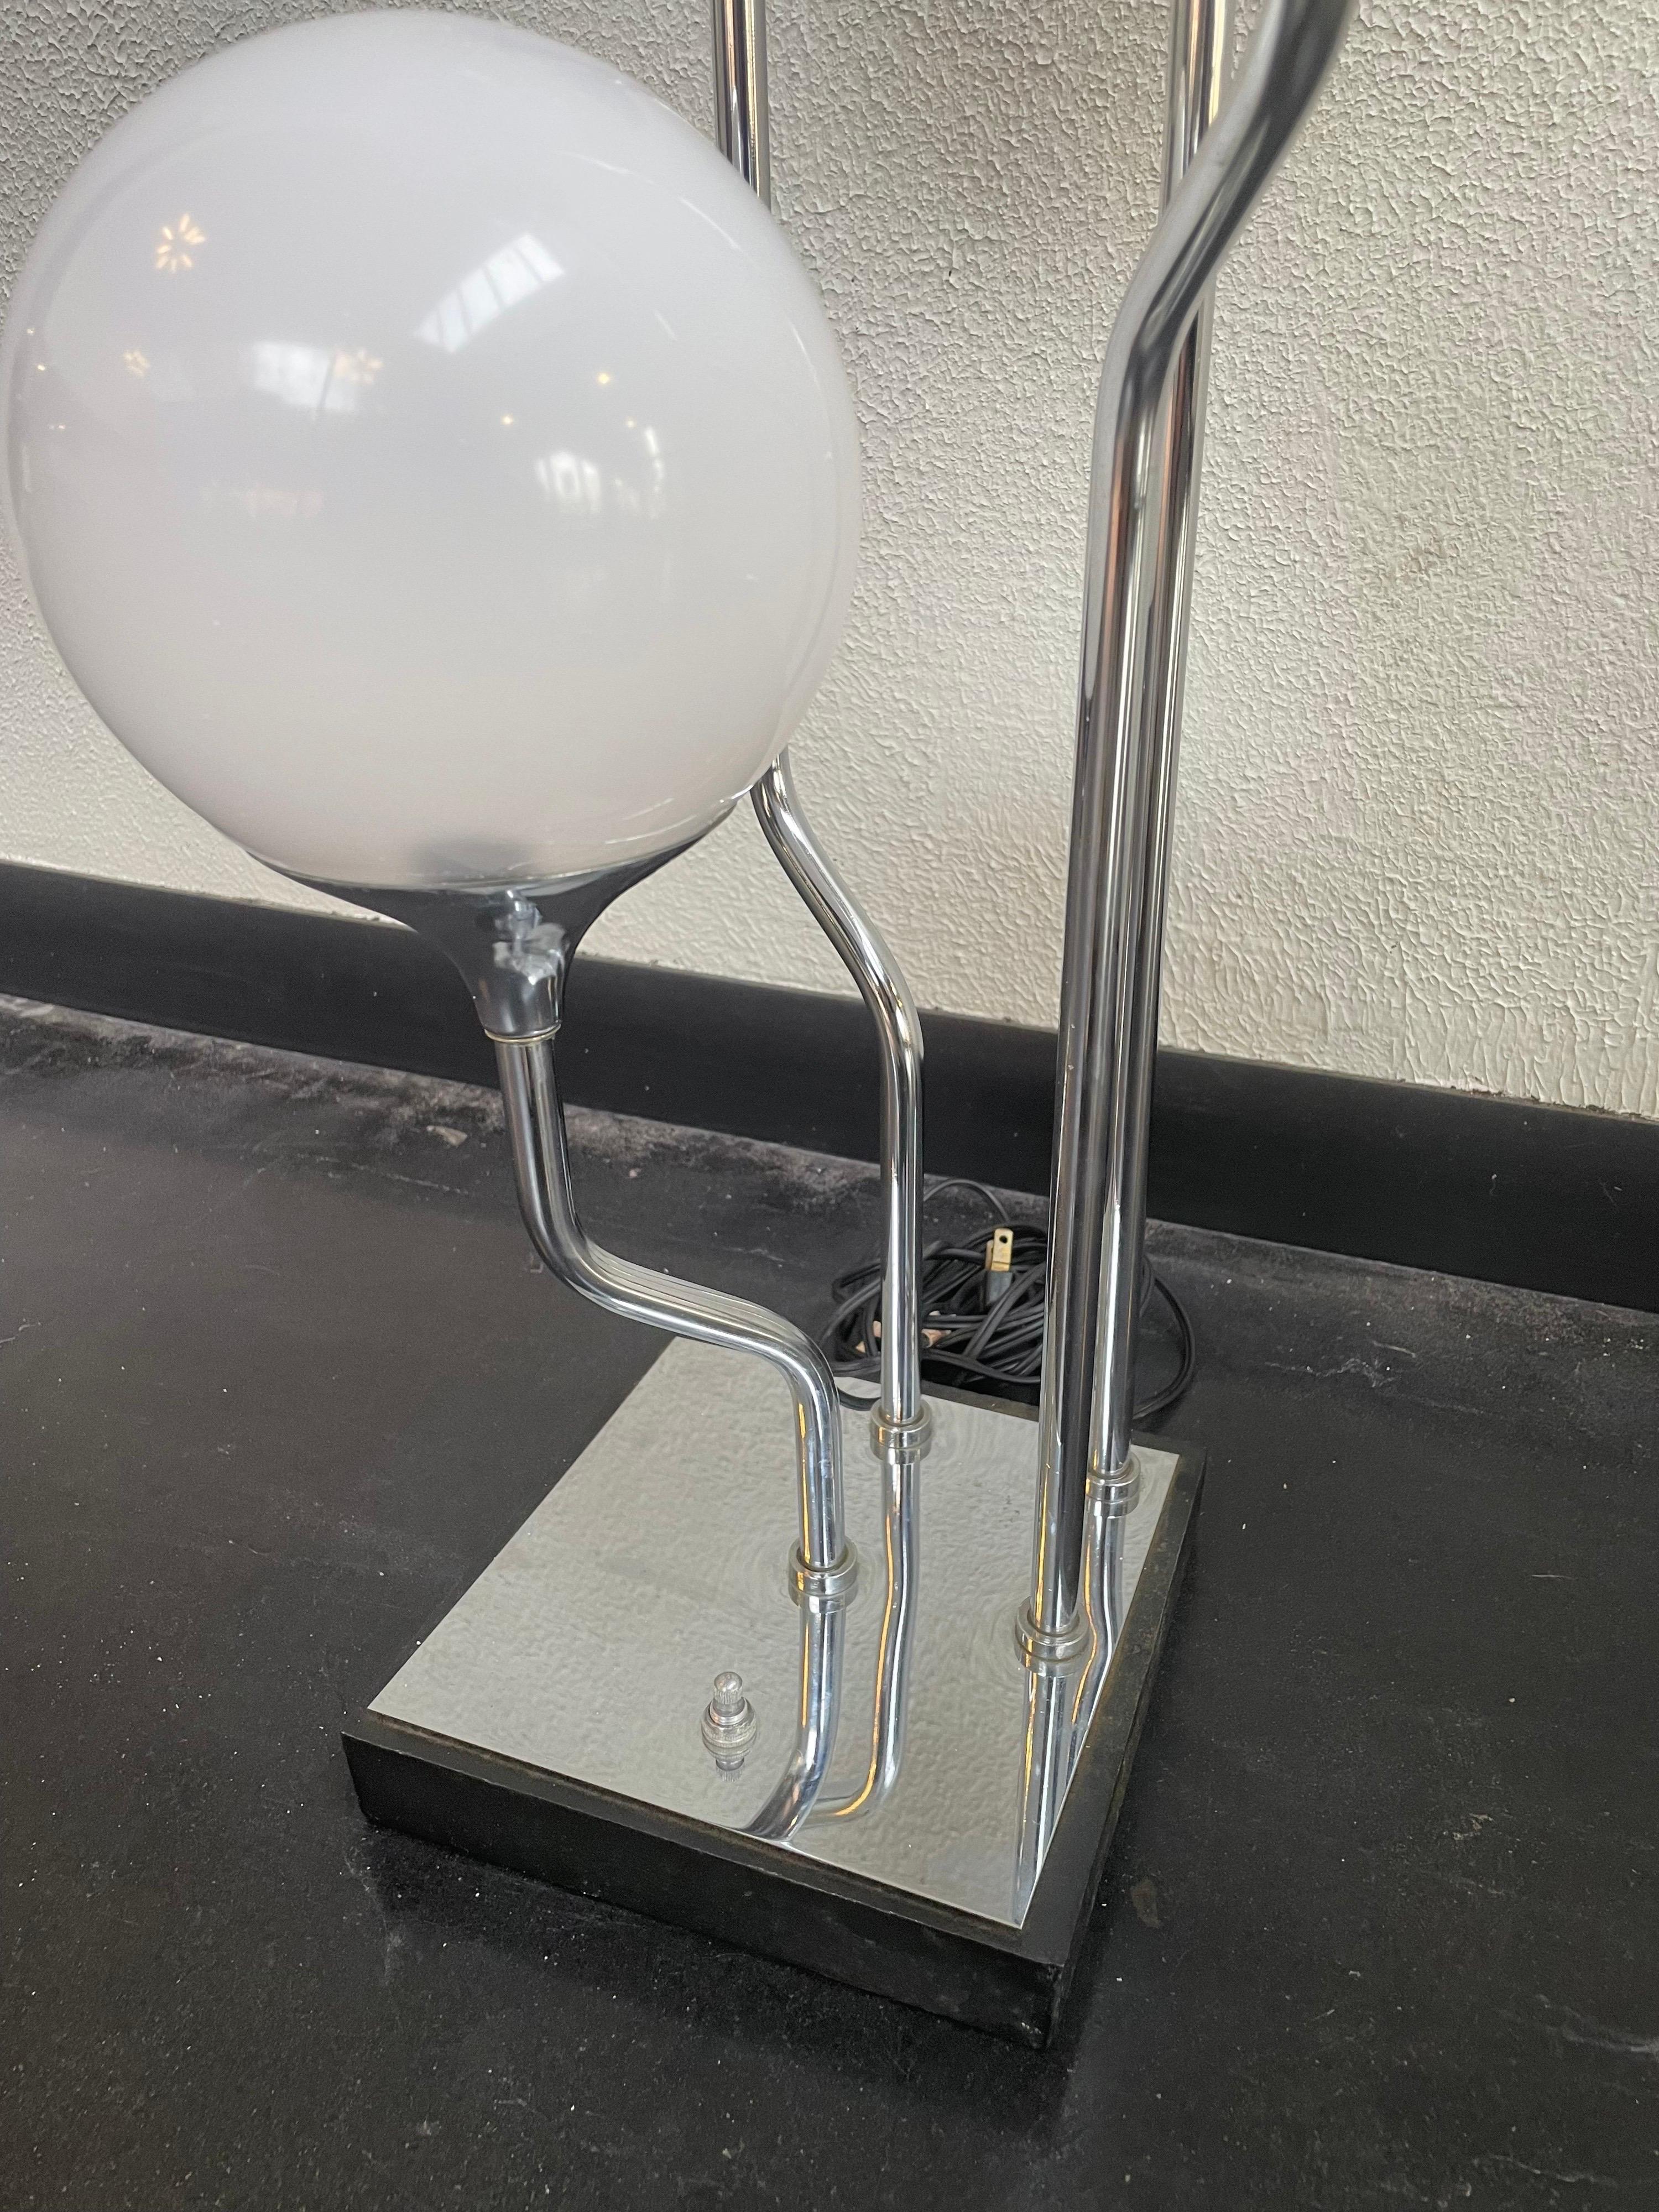 1970s Chrome table lamp with 4 acrylic globes. 3 Way switch allows for the bottom 2, top 2, and all to be turned on. Bottom wood base with chrome top.